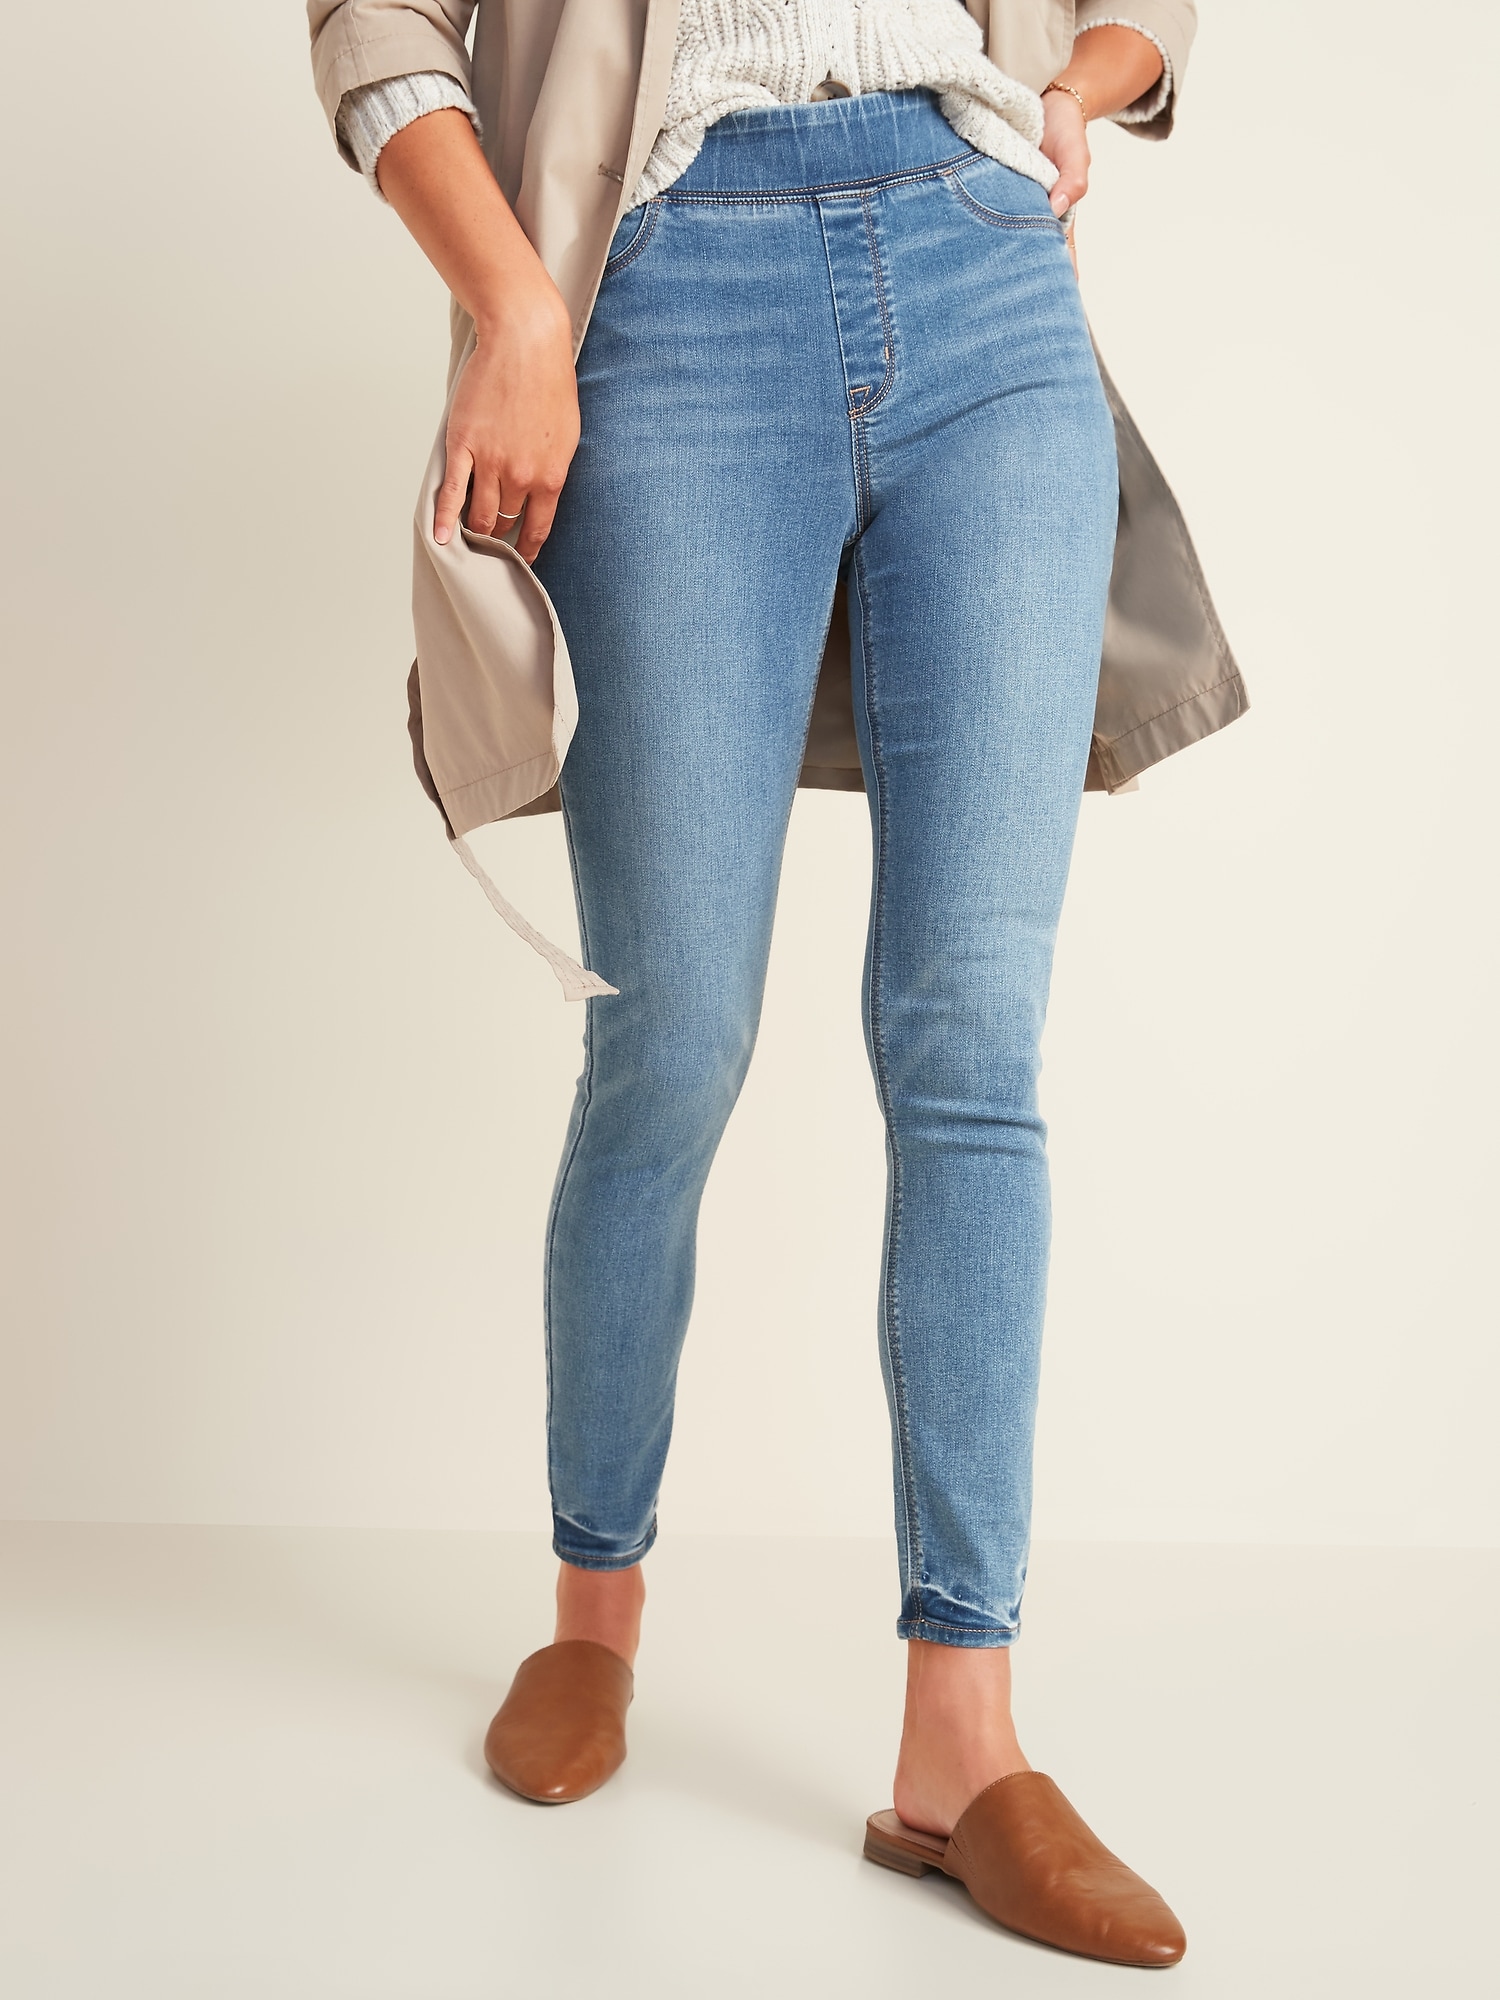 pull on jeans old navy